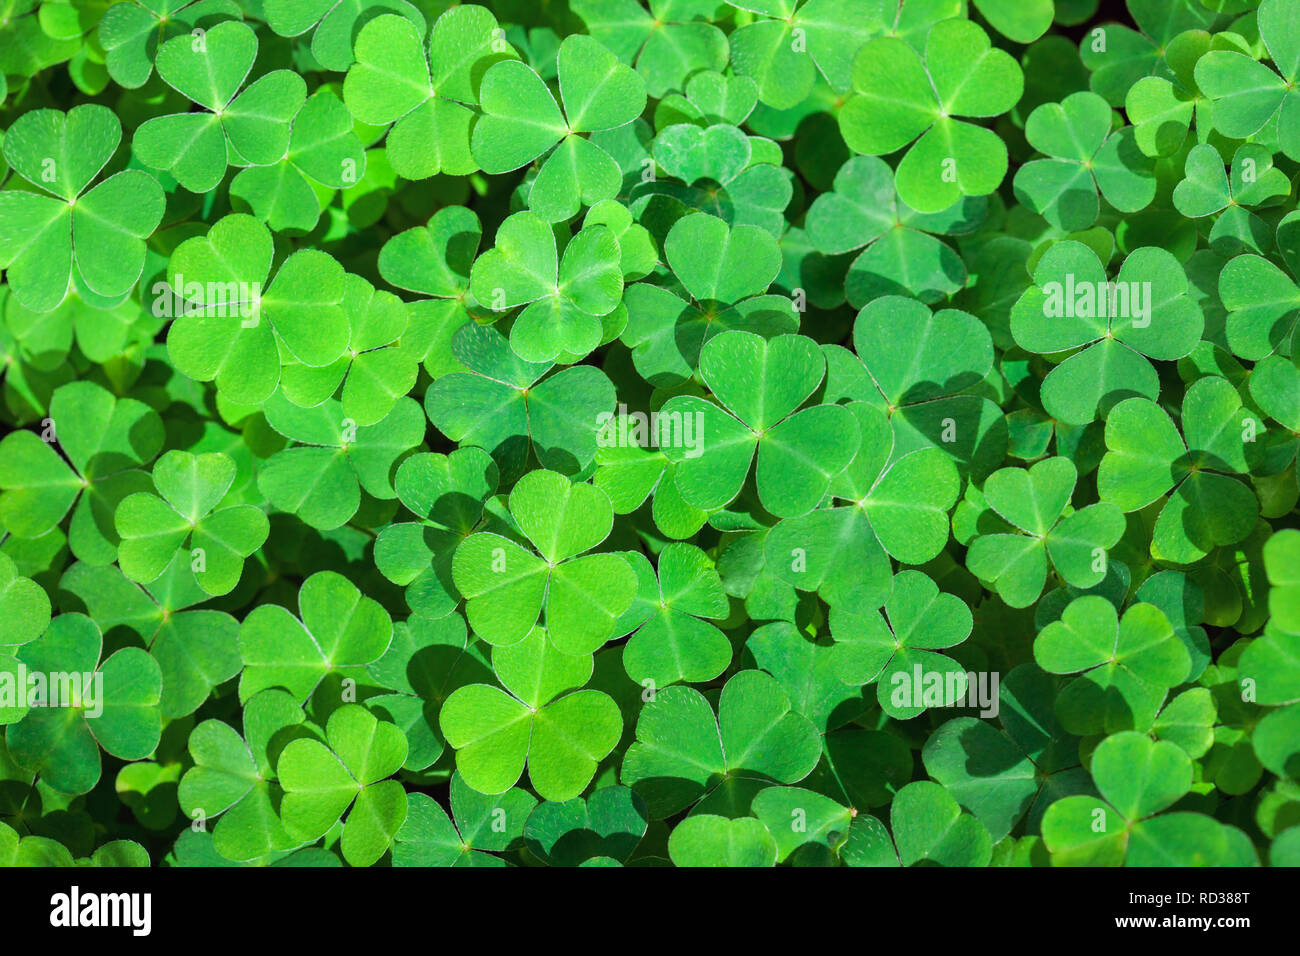 Green background with three-leaved shamrocks. St. Patrick's day holiday symbol.   Selective focus. Stock Photo